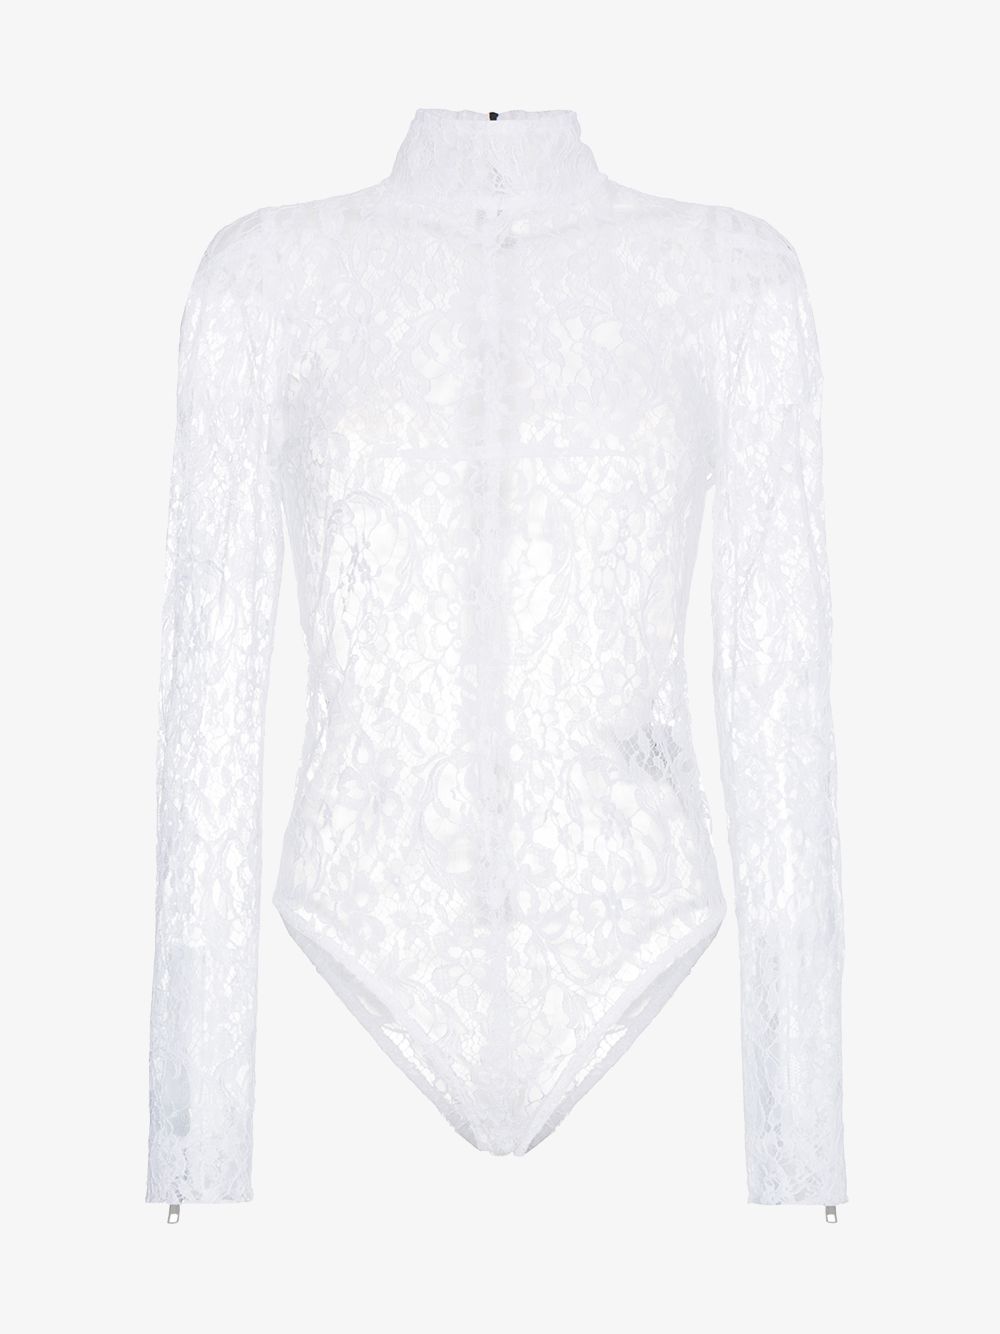 Givenchy fitted lace bodysuit | Browns Fashion